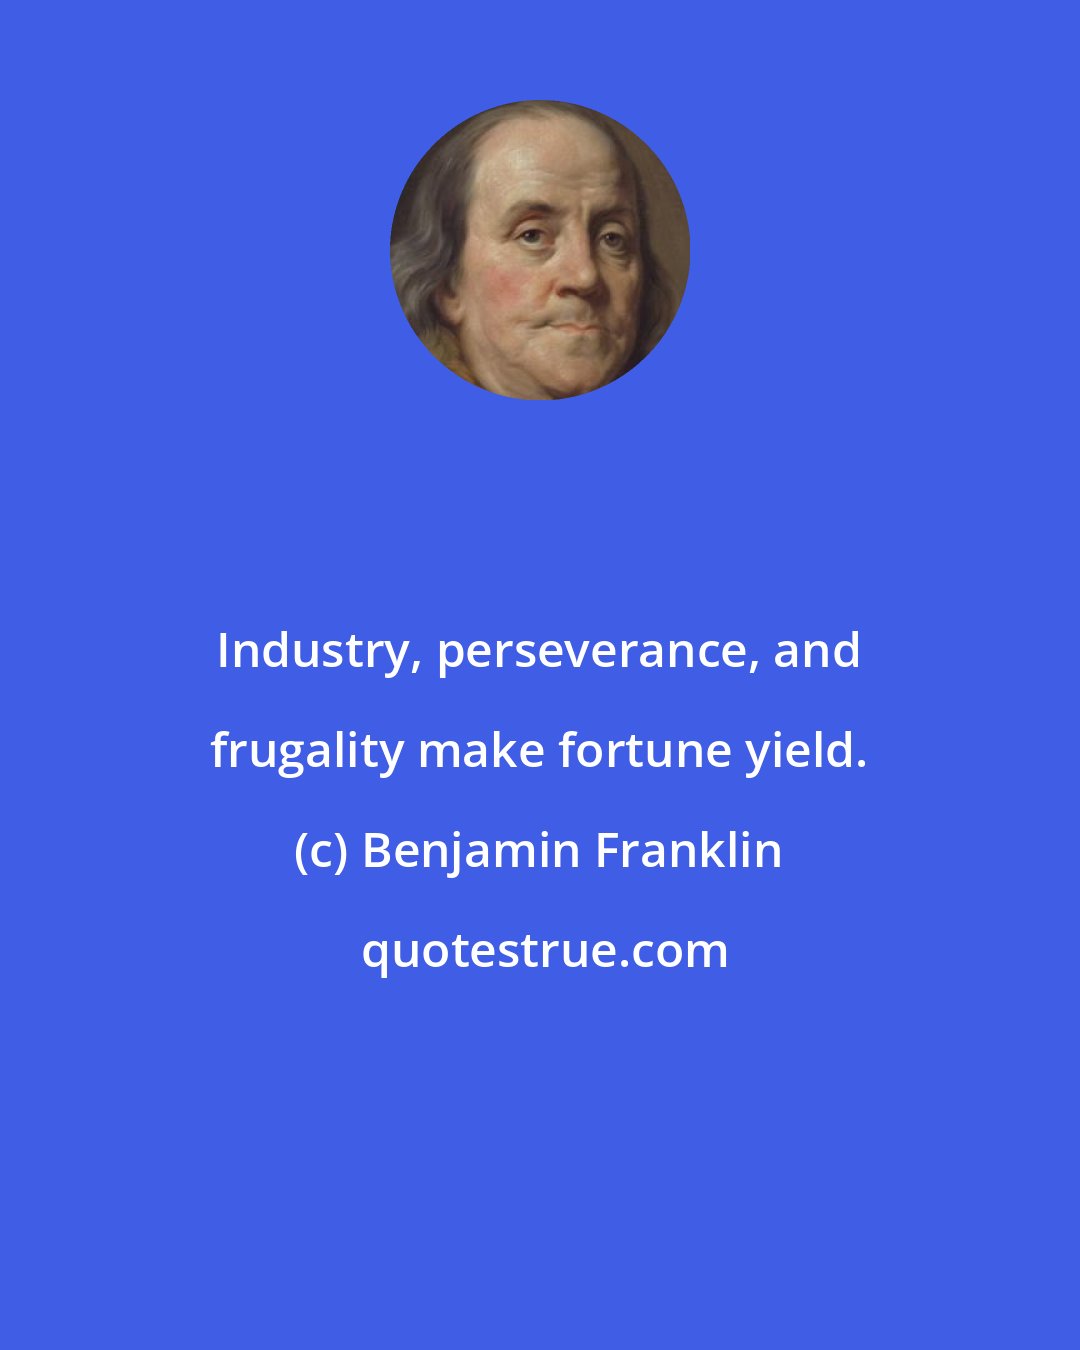 Benjamin Franklin: Industry, perseverance, and frugality make fortune yield.